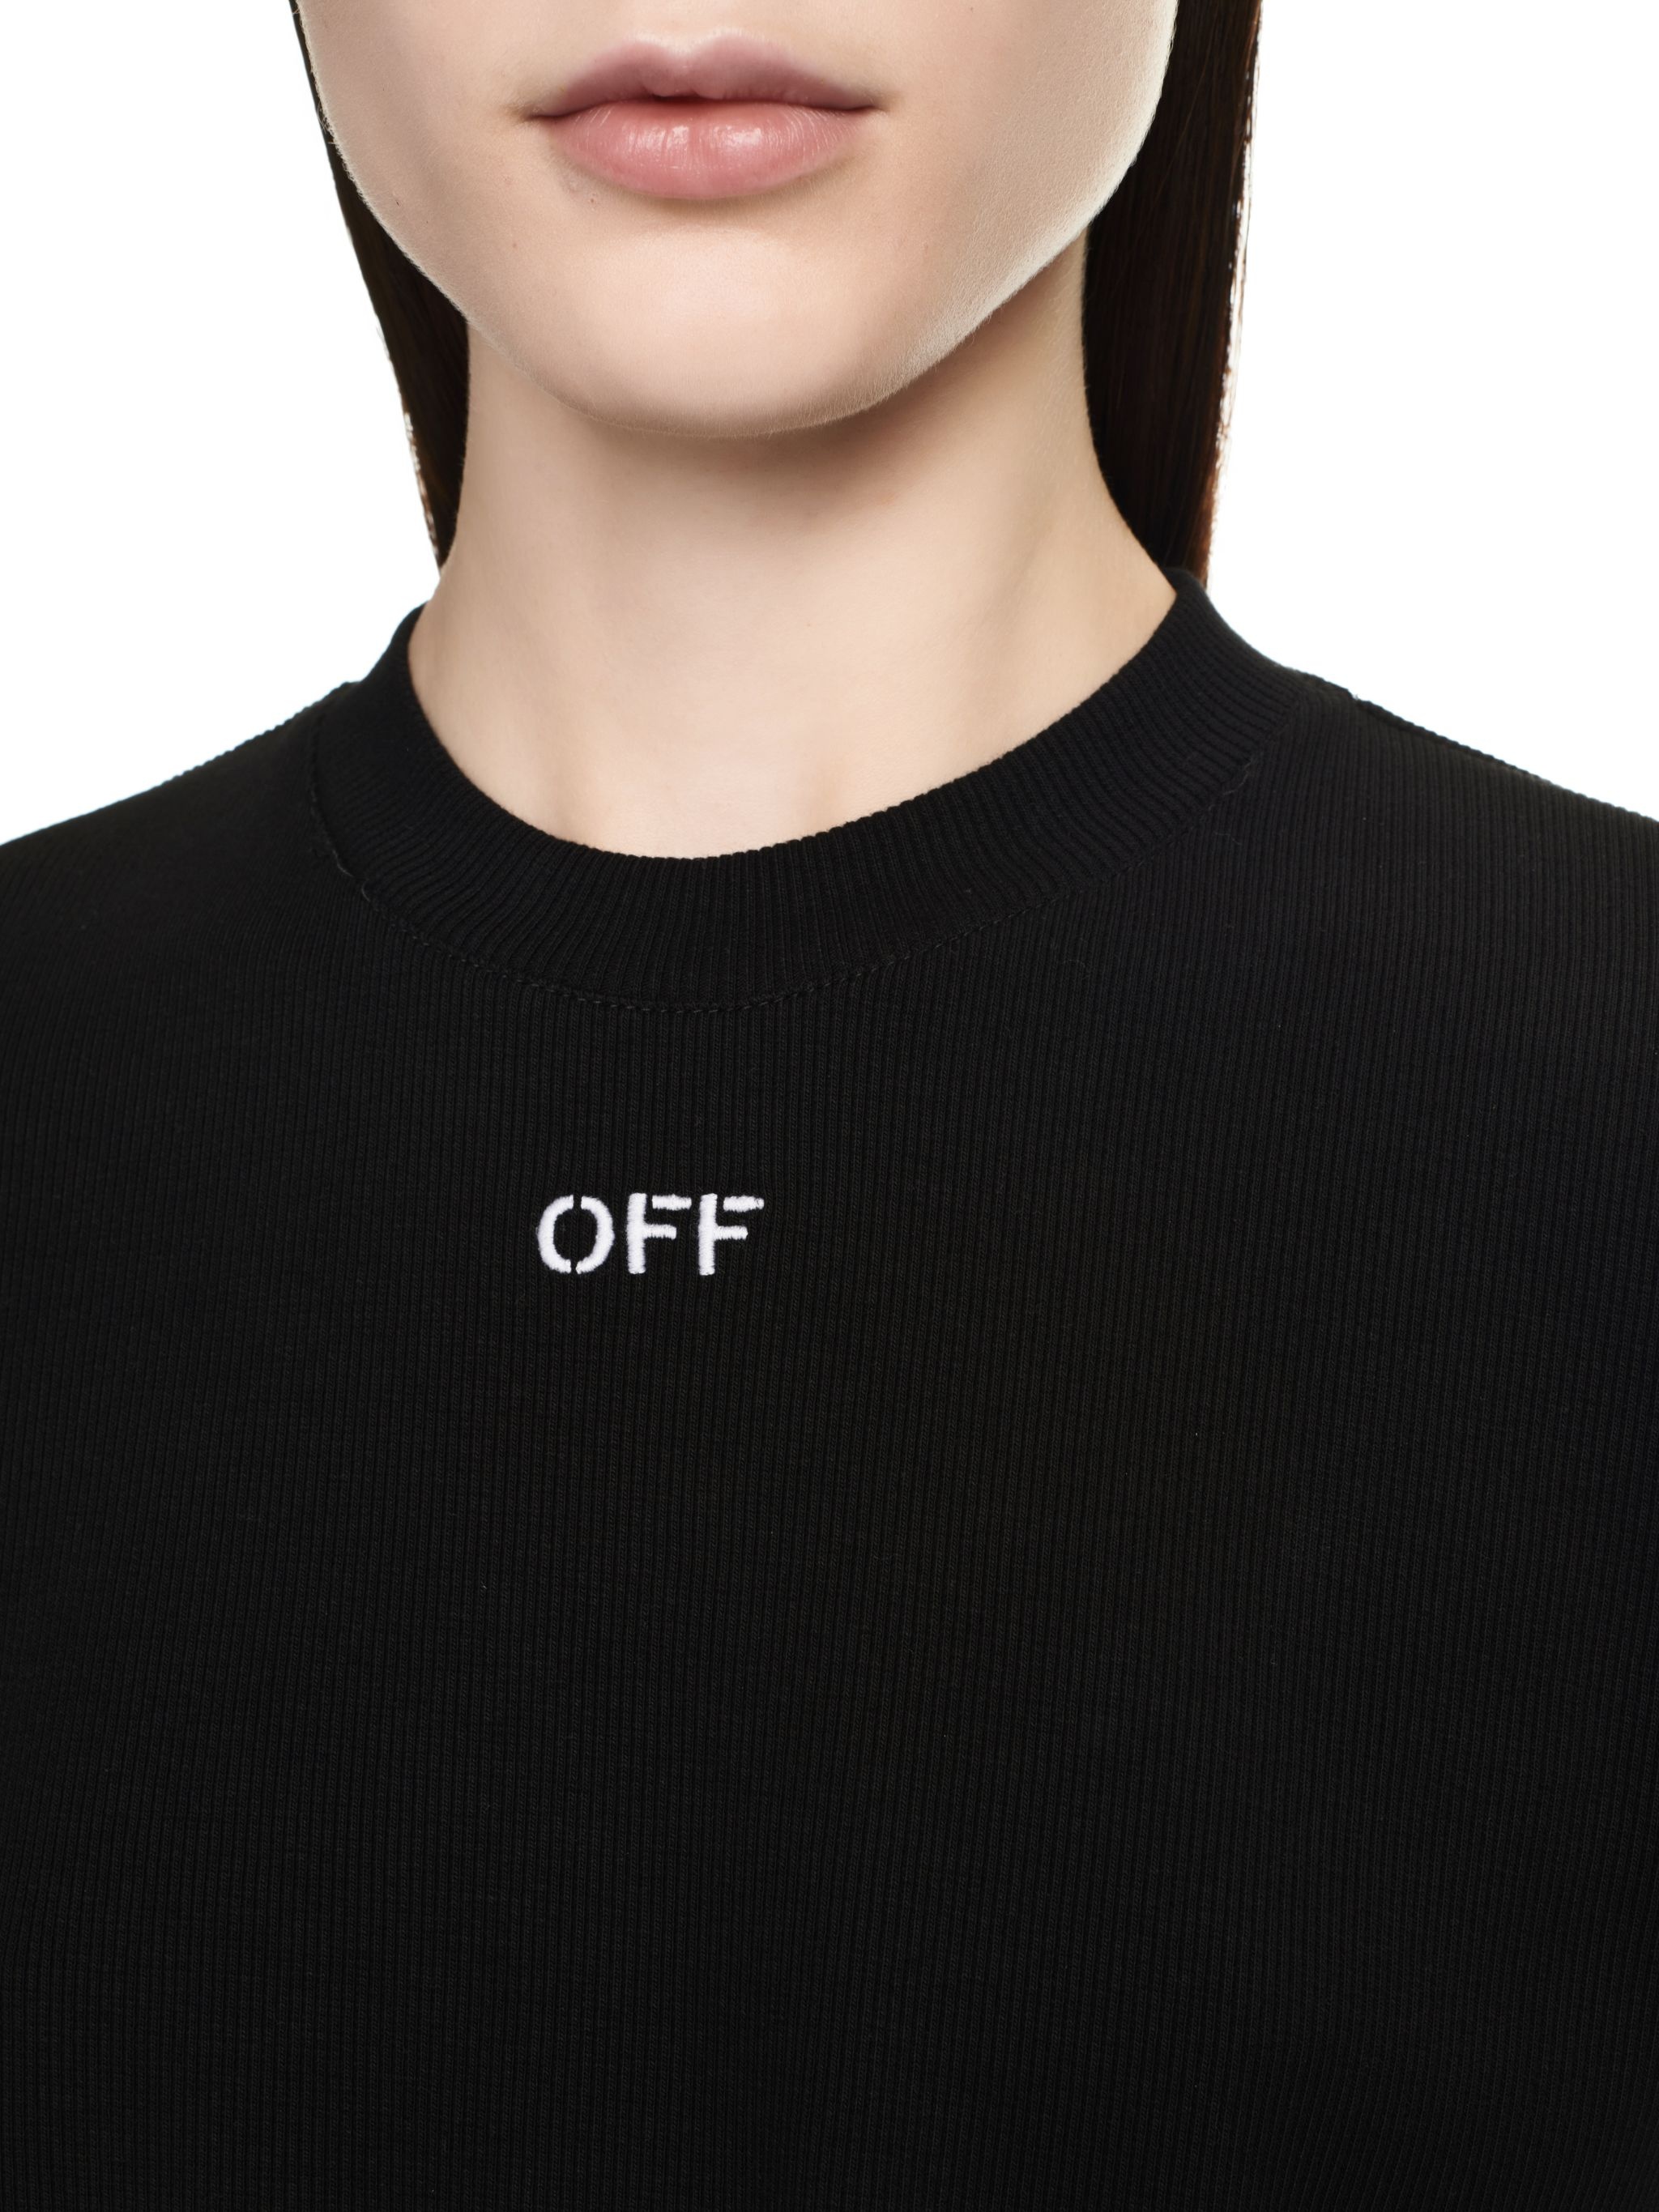 Off Stamp Rib Cropped Tee - 5